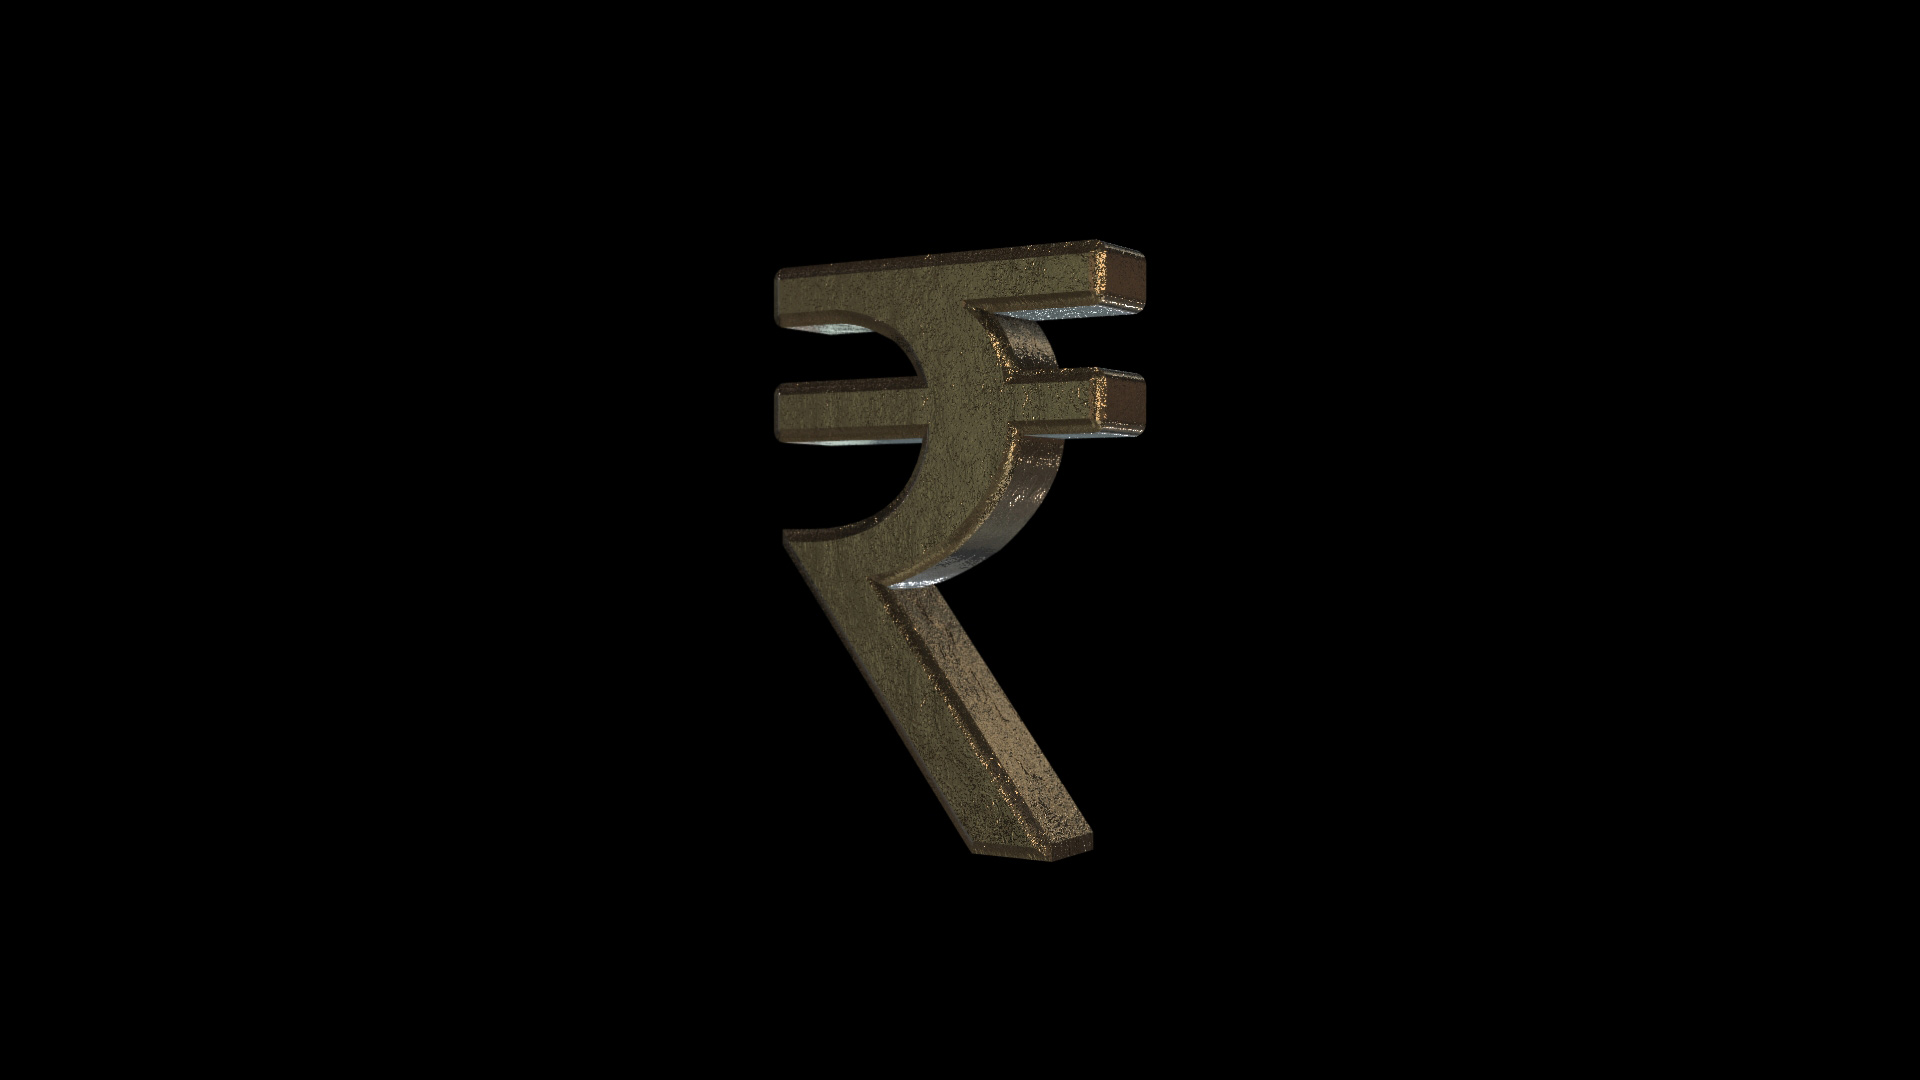 3D Raa Indian currency symbol 